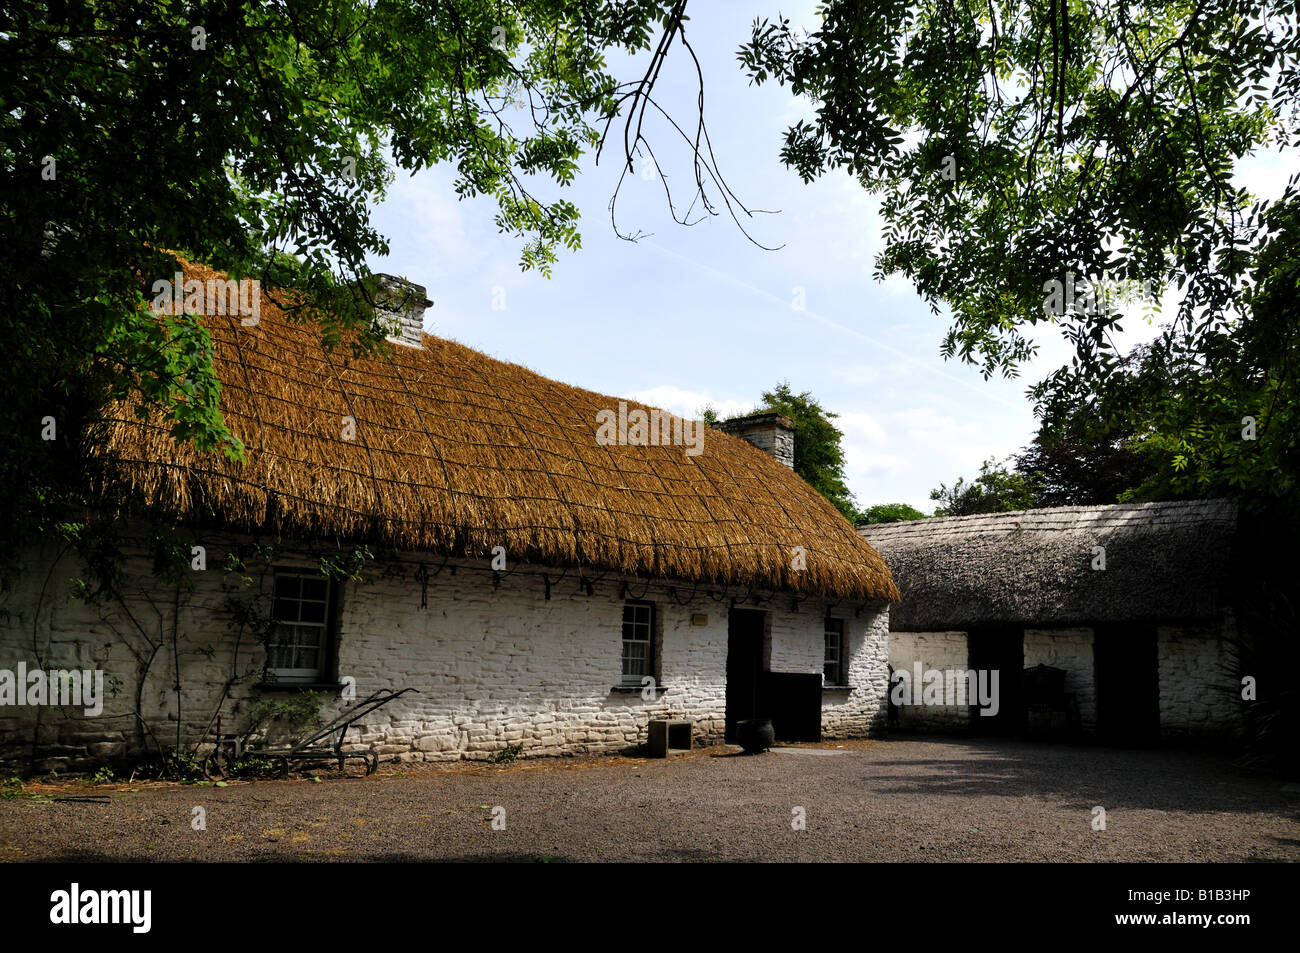 A traditional farm house in Irish countryside. Stock Photo